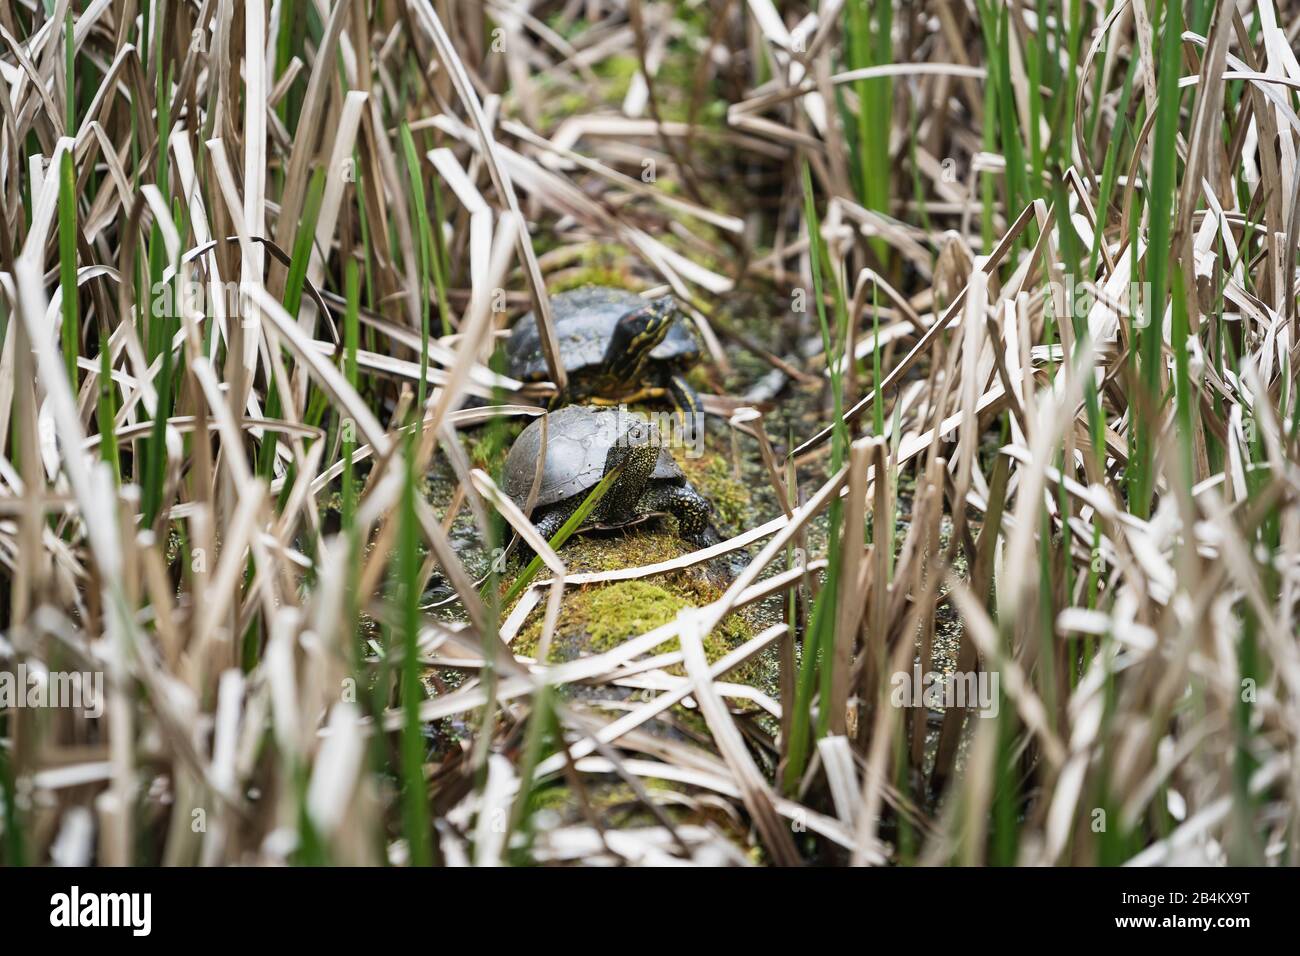 Turtles, Testudines, on an old log in the reeds Stock Photo